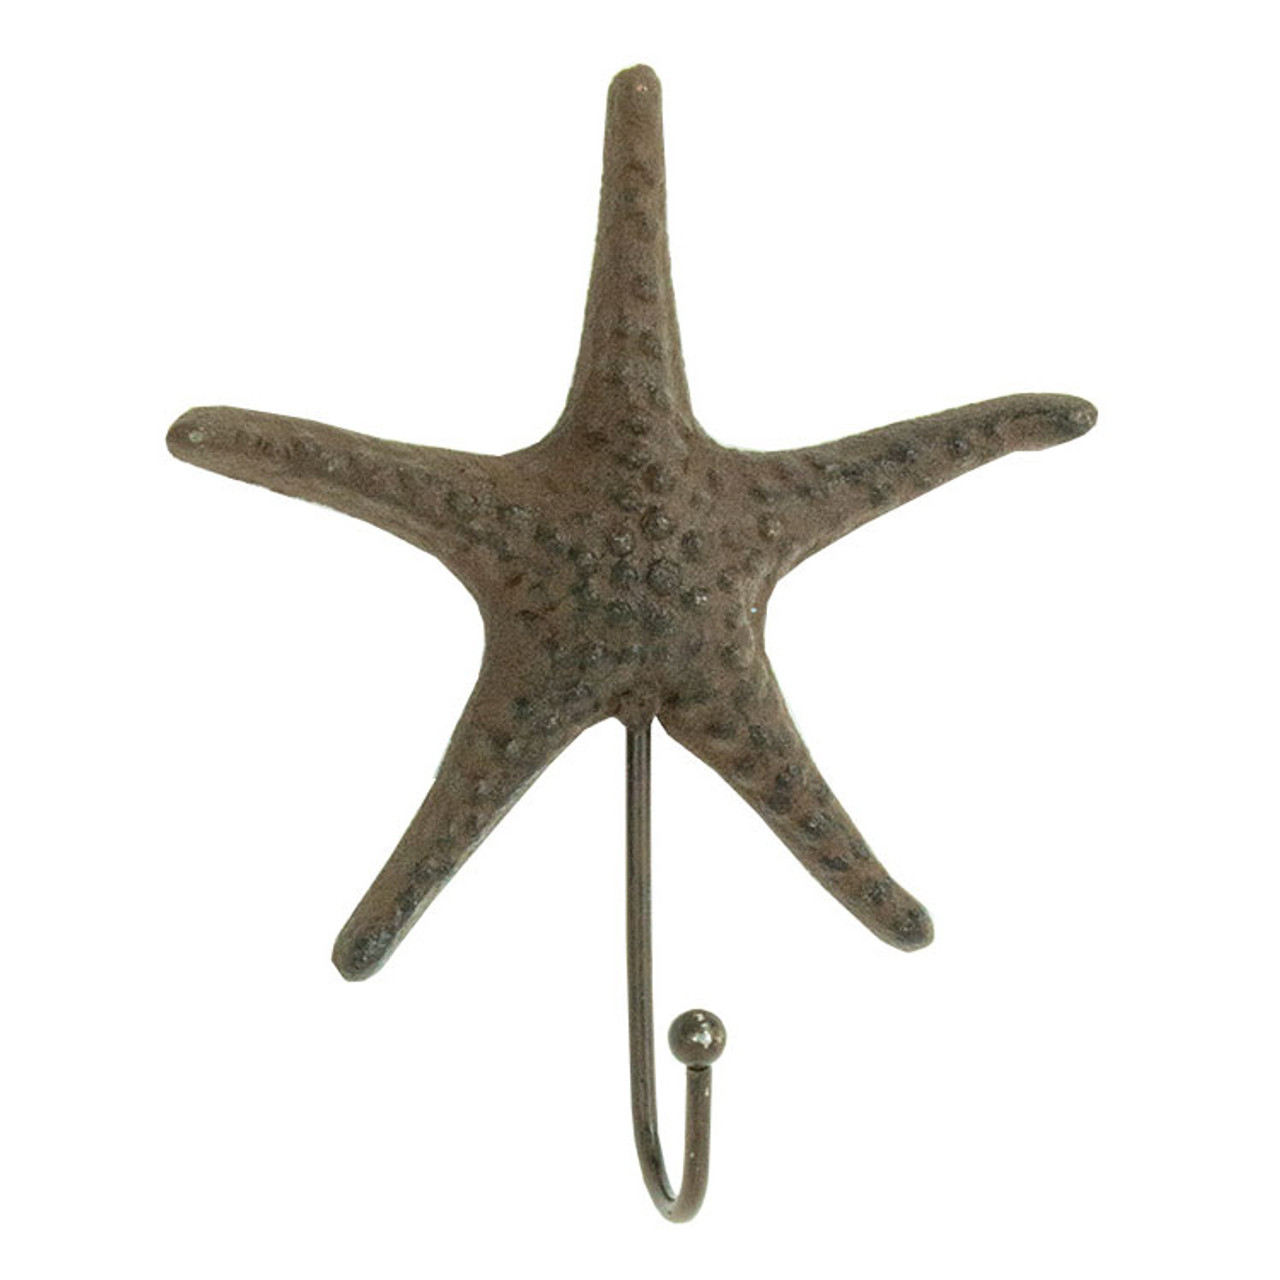 Rust Whale Tail Iron Wall Hook - Nautical Key Ring or Towel Hanger